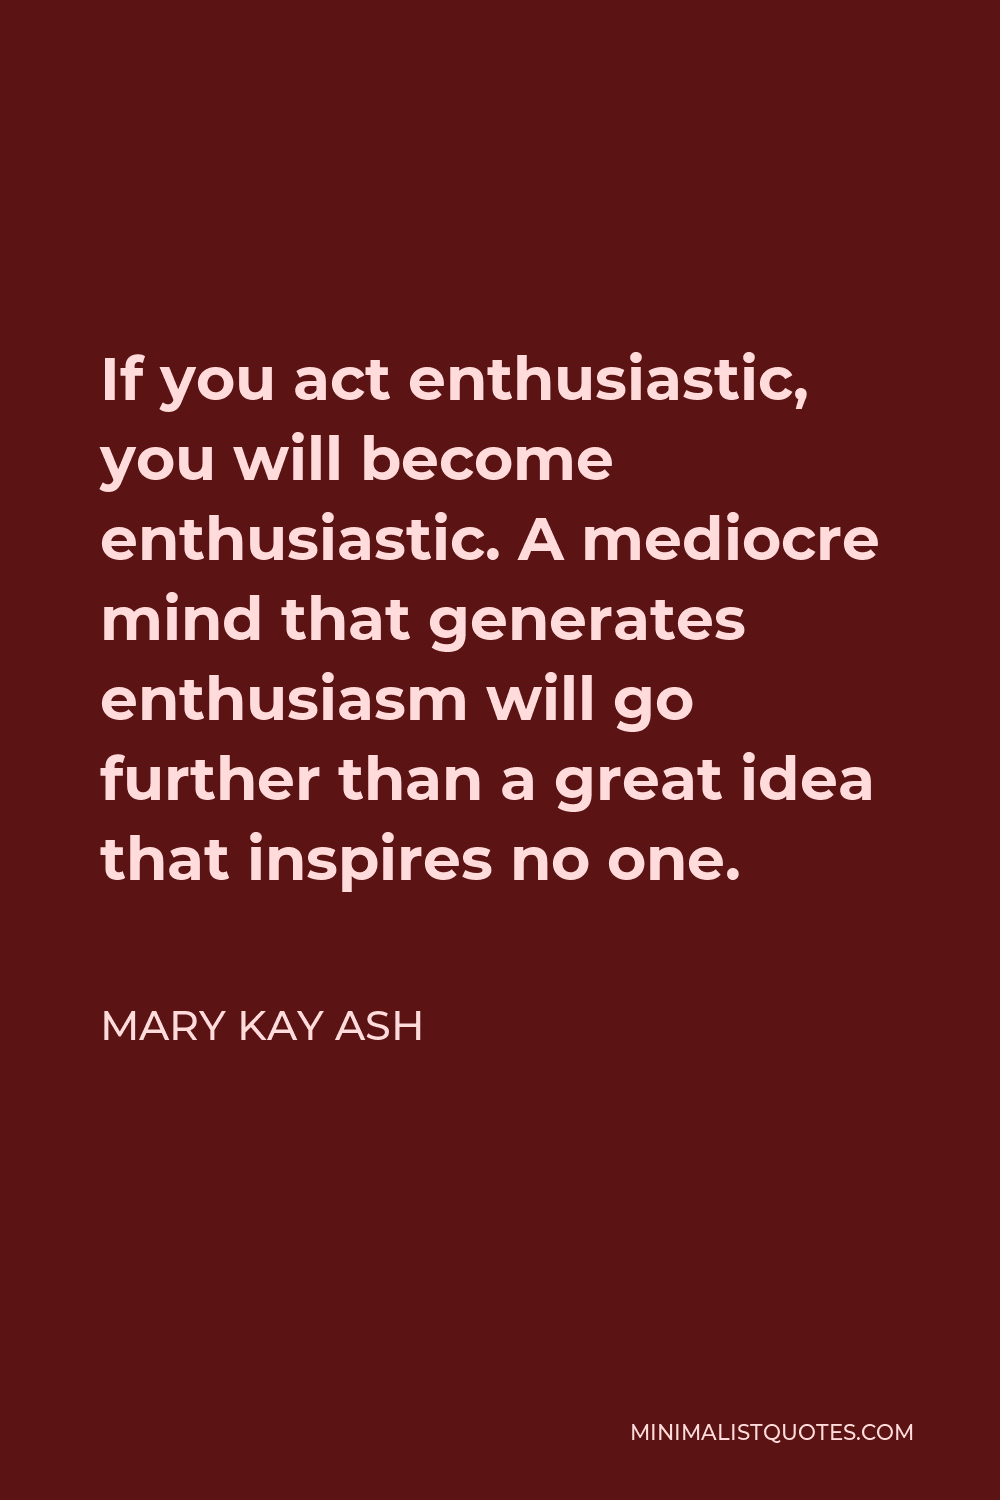 Mary Kay Ash Quote - If you act enthusiastic, you will become enthusiastic. A mediocre mind that generates enthusiasm will go further than a great idea that inspires no one.